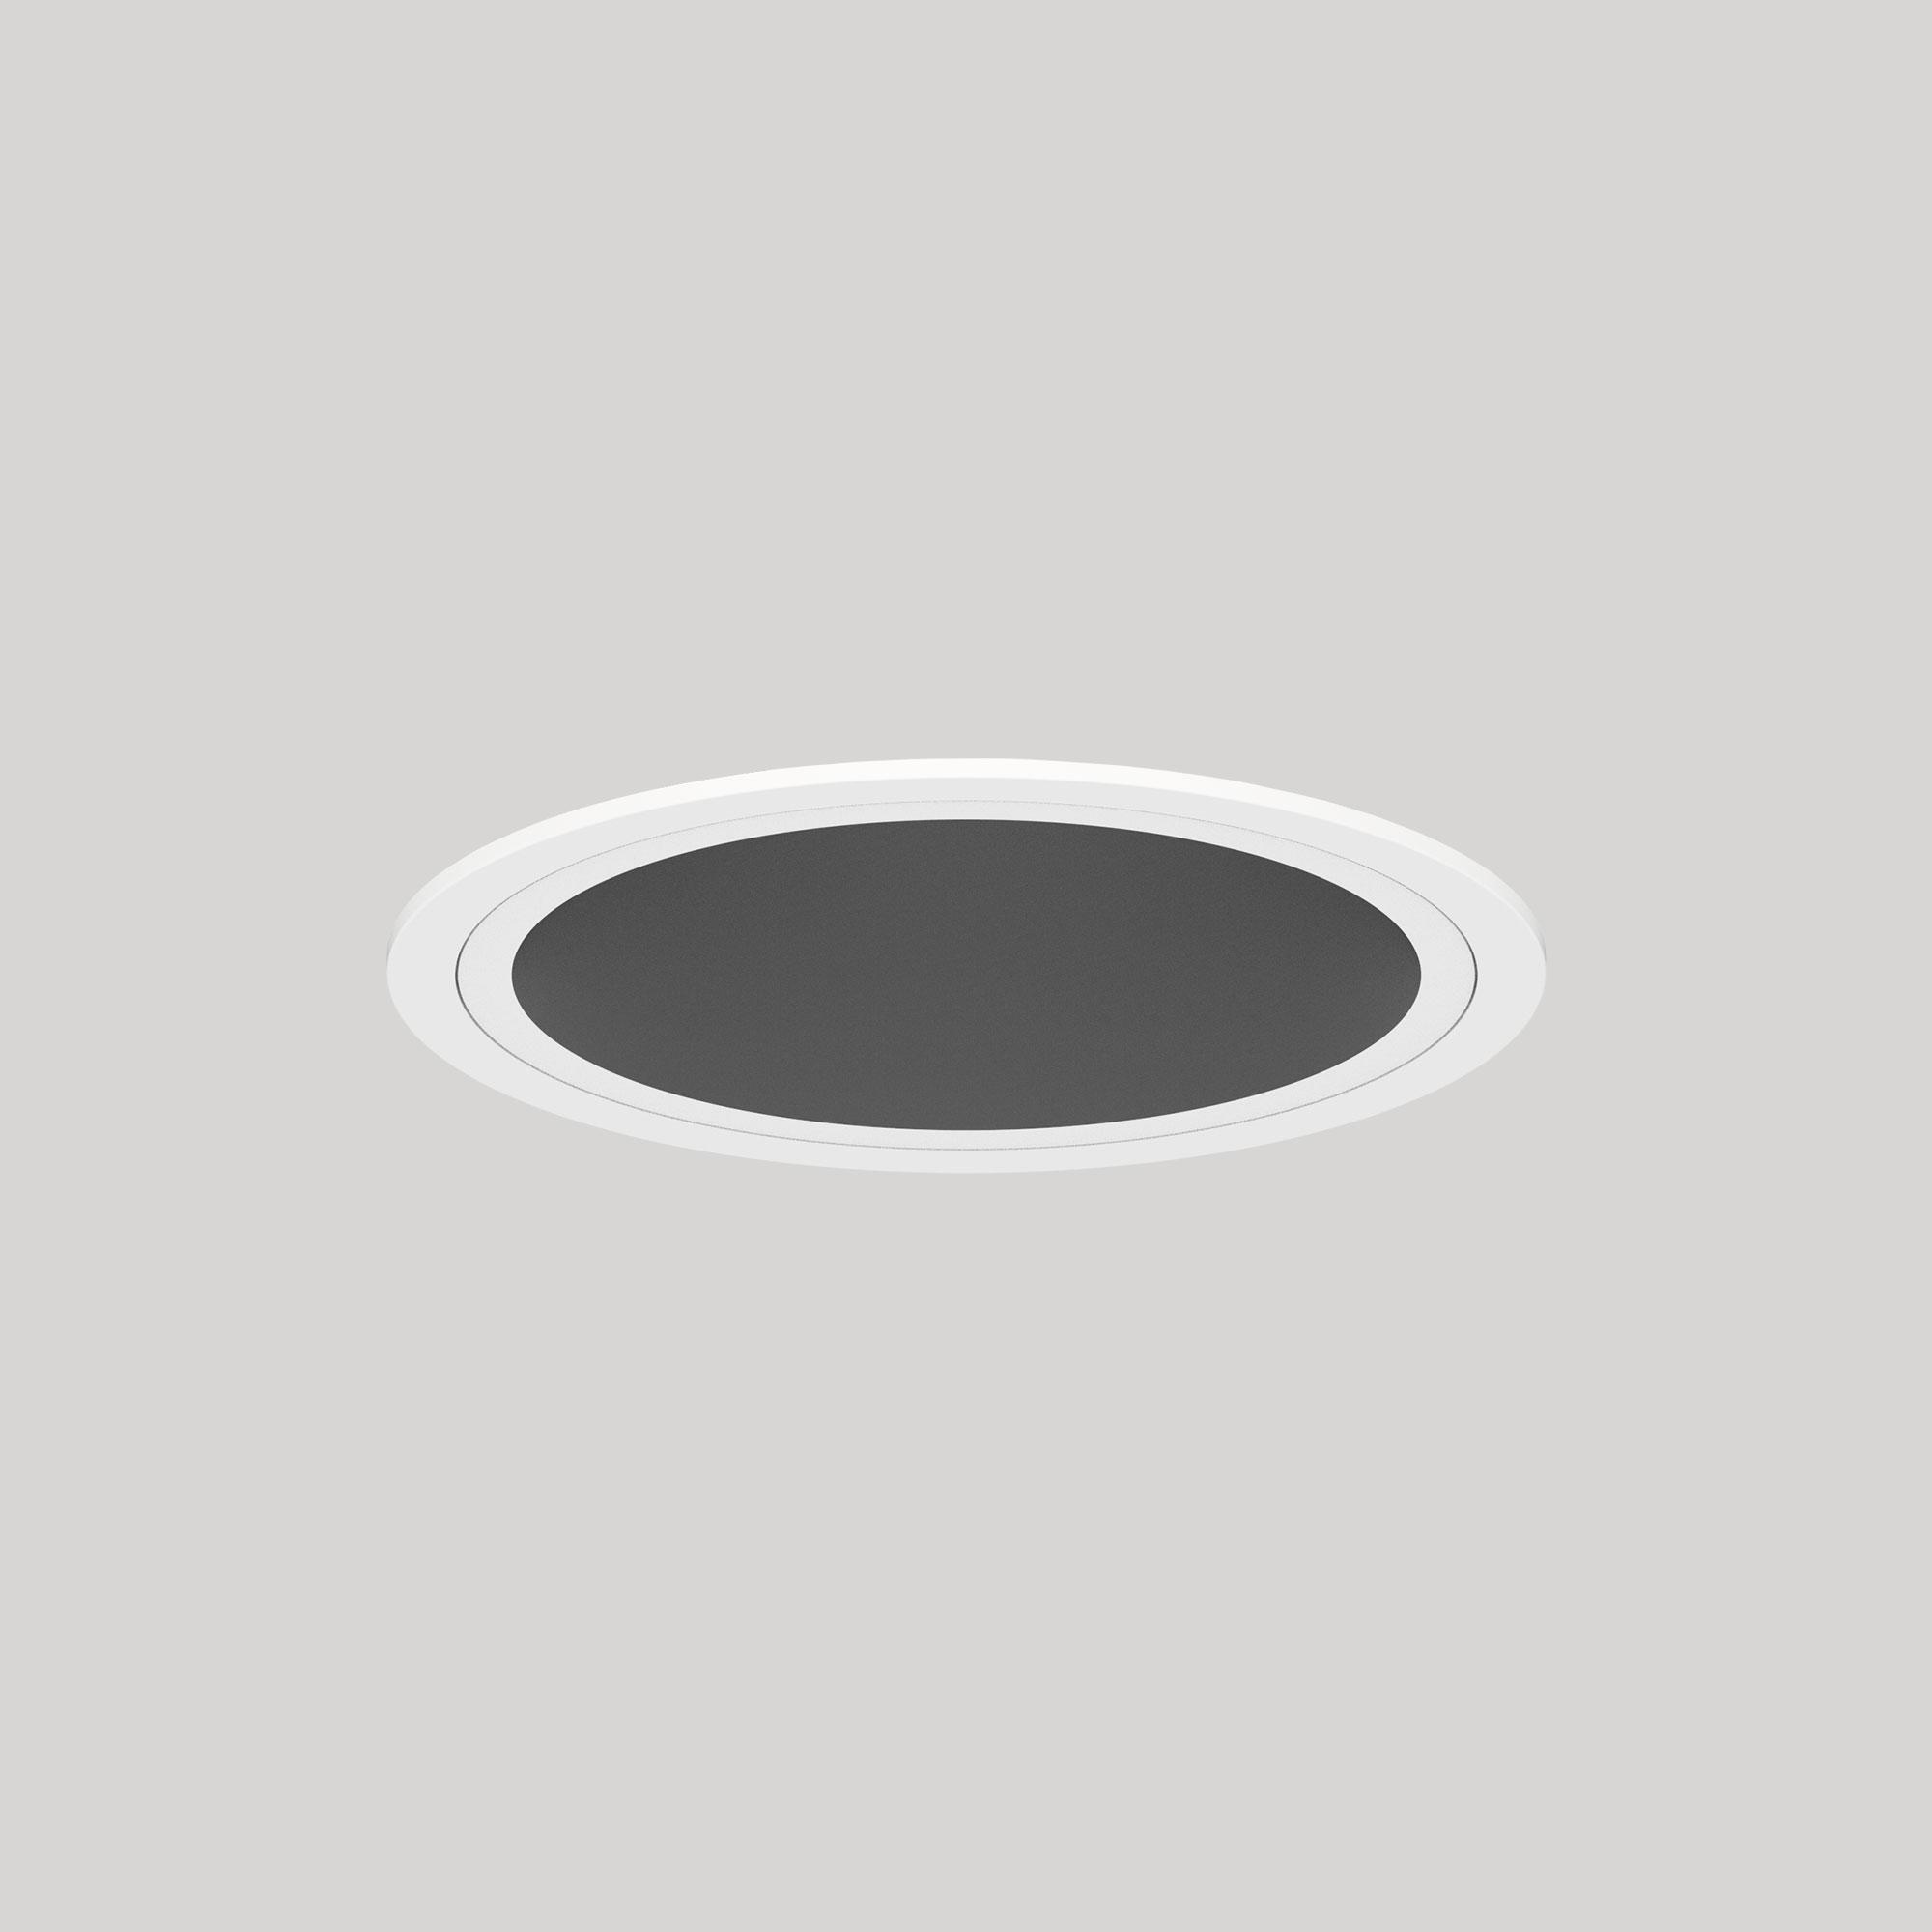 Standard 114mm Ceiling Recessed Round Fixed STD-E01C1G-WBD - Standard-STD-E01-WB-Installed.jpg